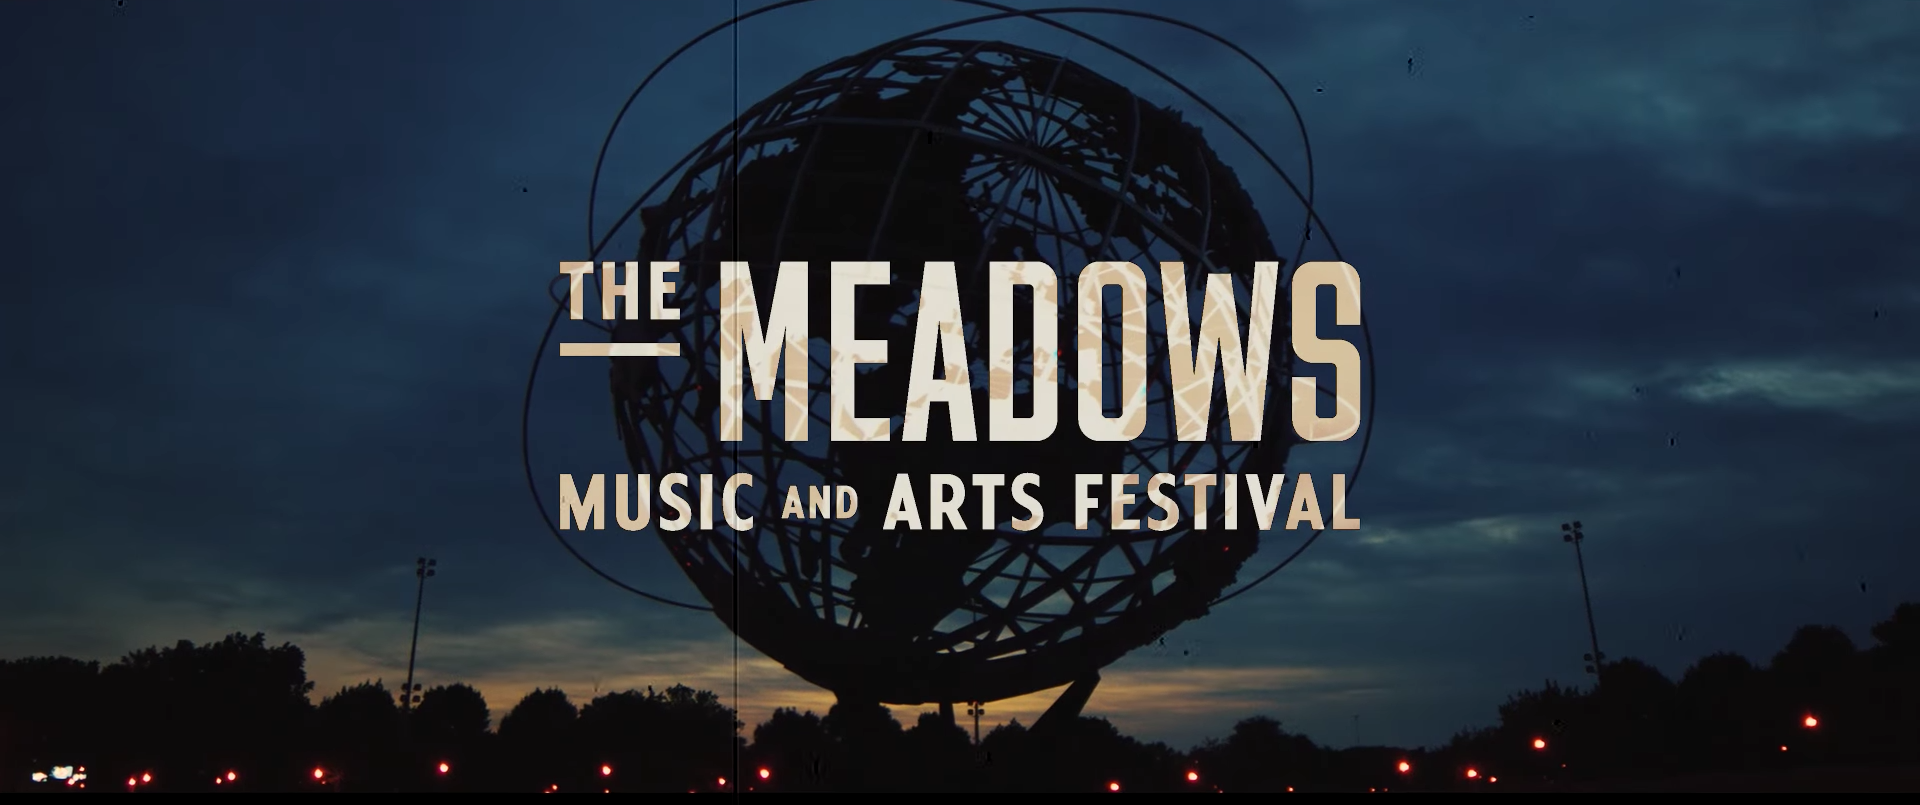 The Meadows Music Festival. Photo by: The Meadows Music & Arts Festival